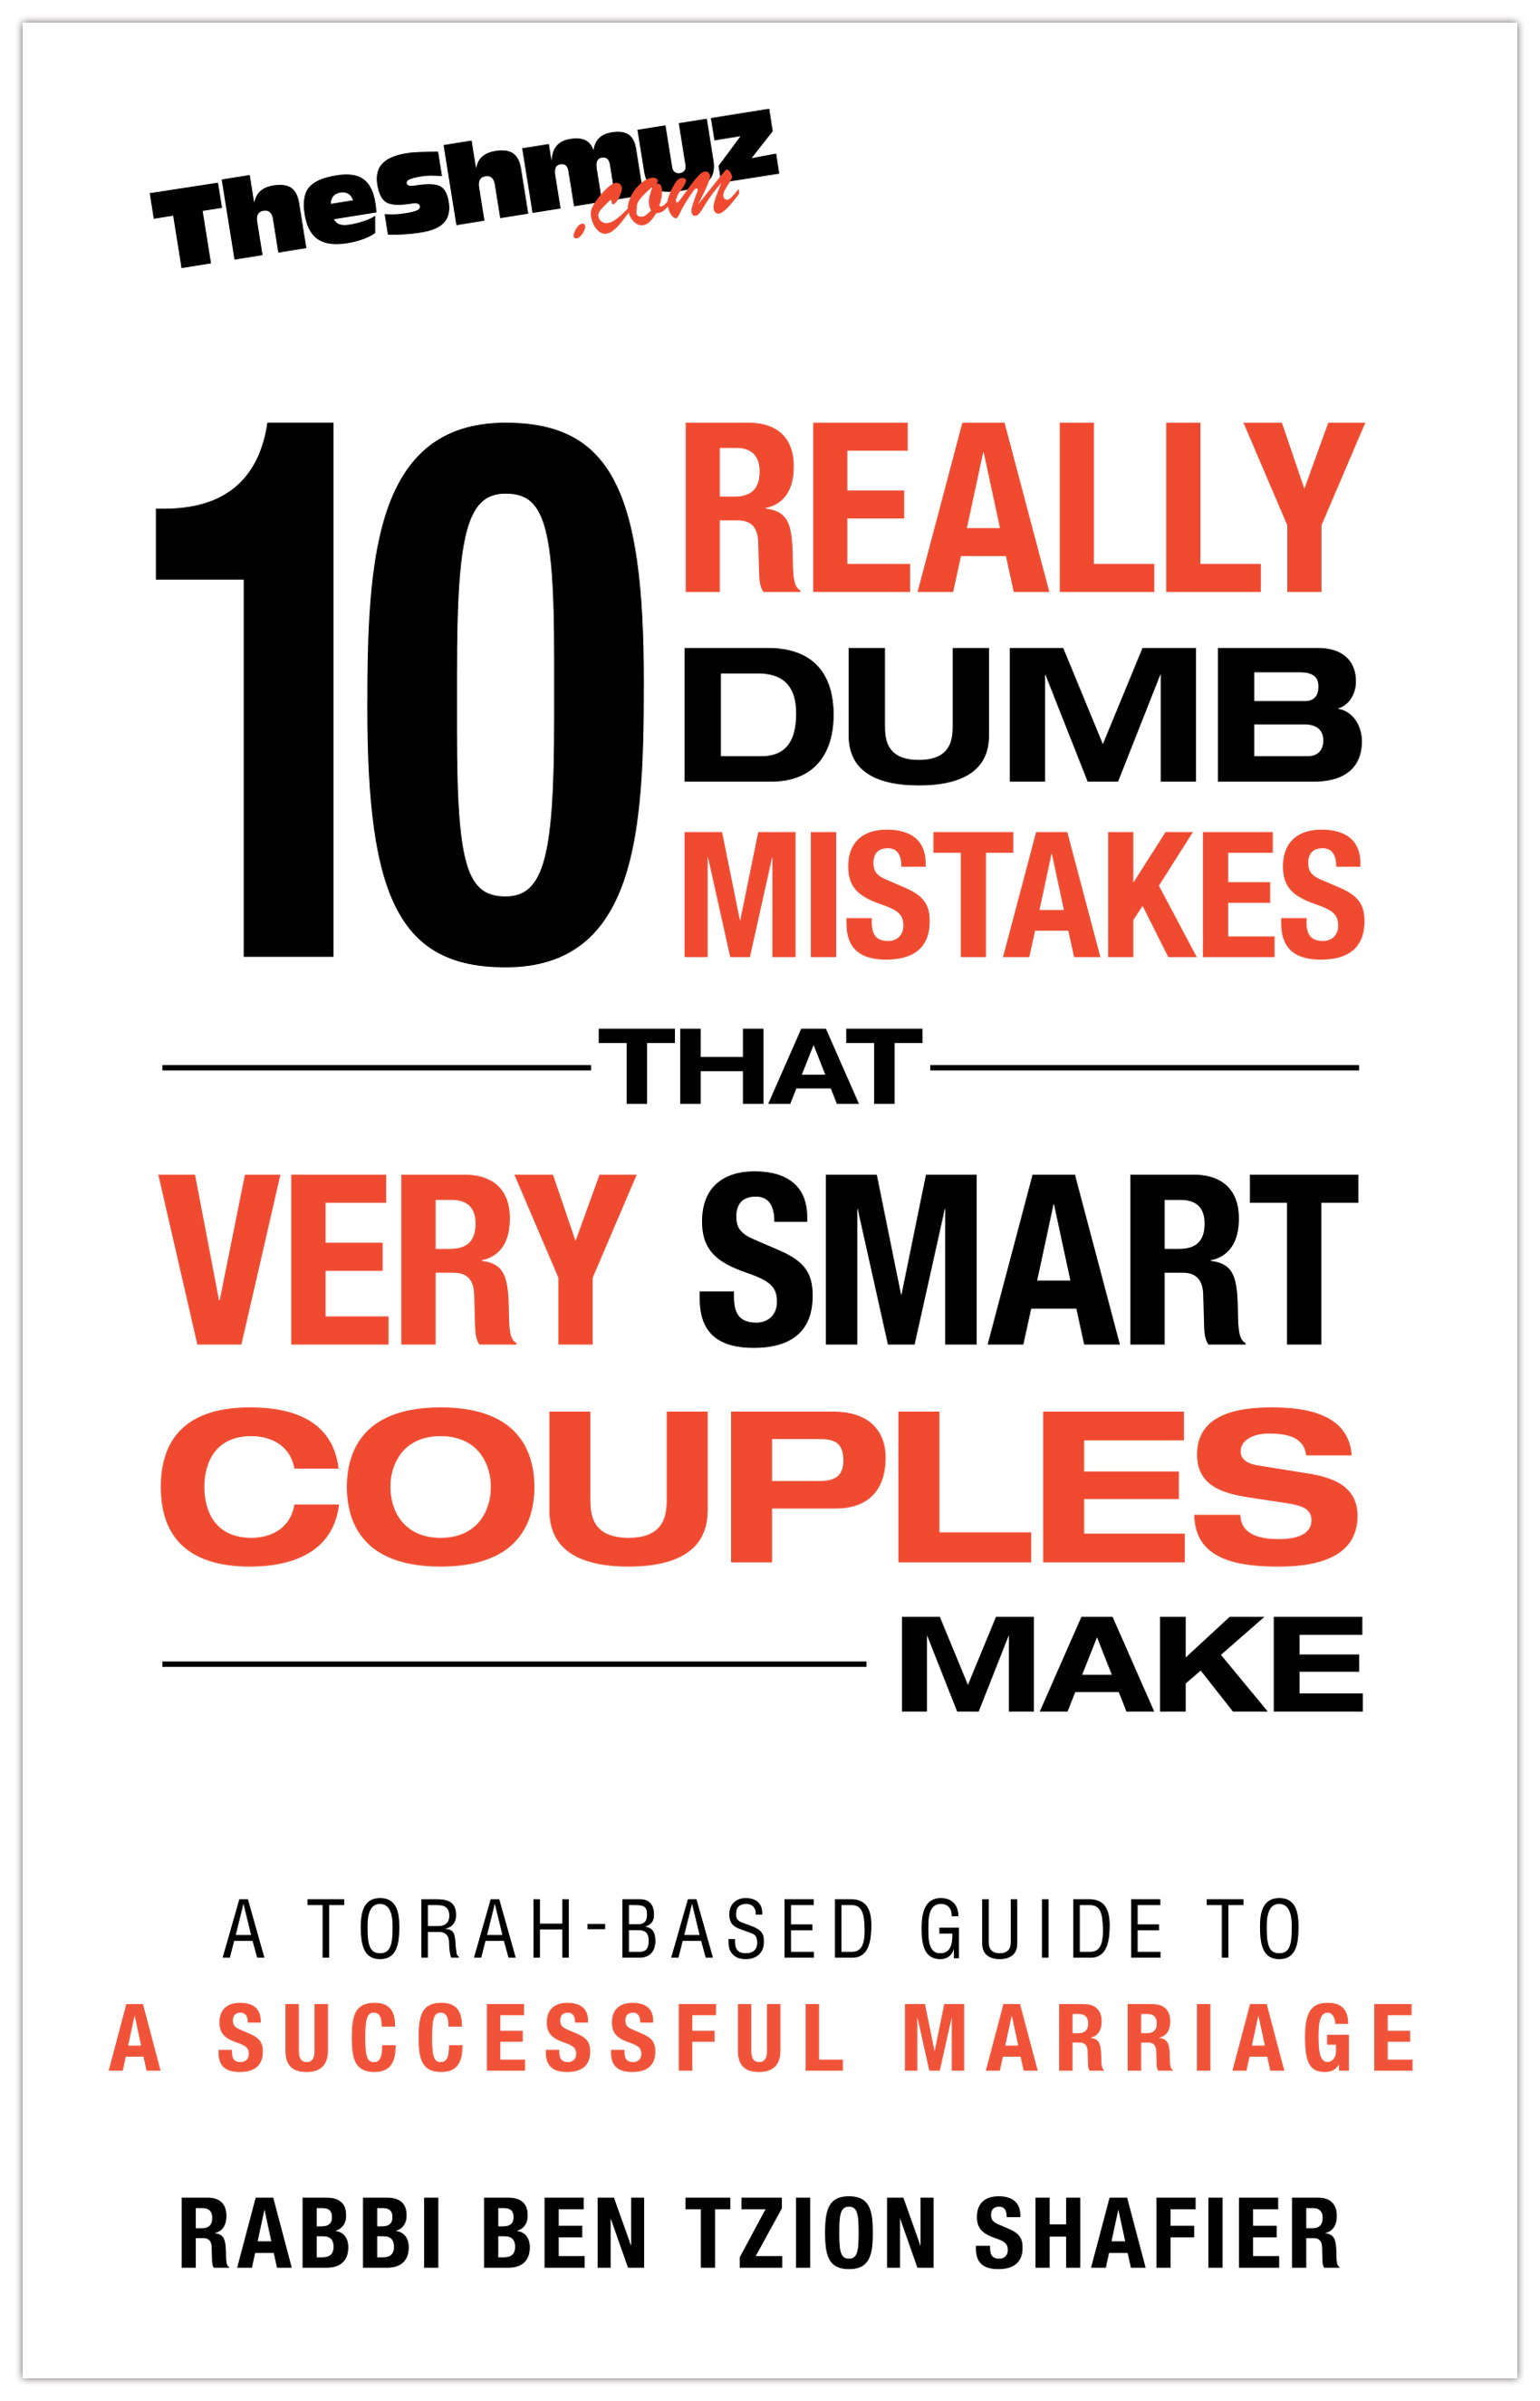 The Ten Really Dumb Mistakes That Very Smart Couples Make